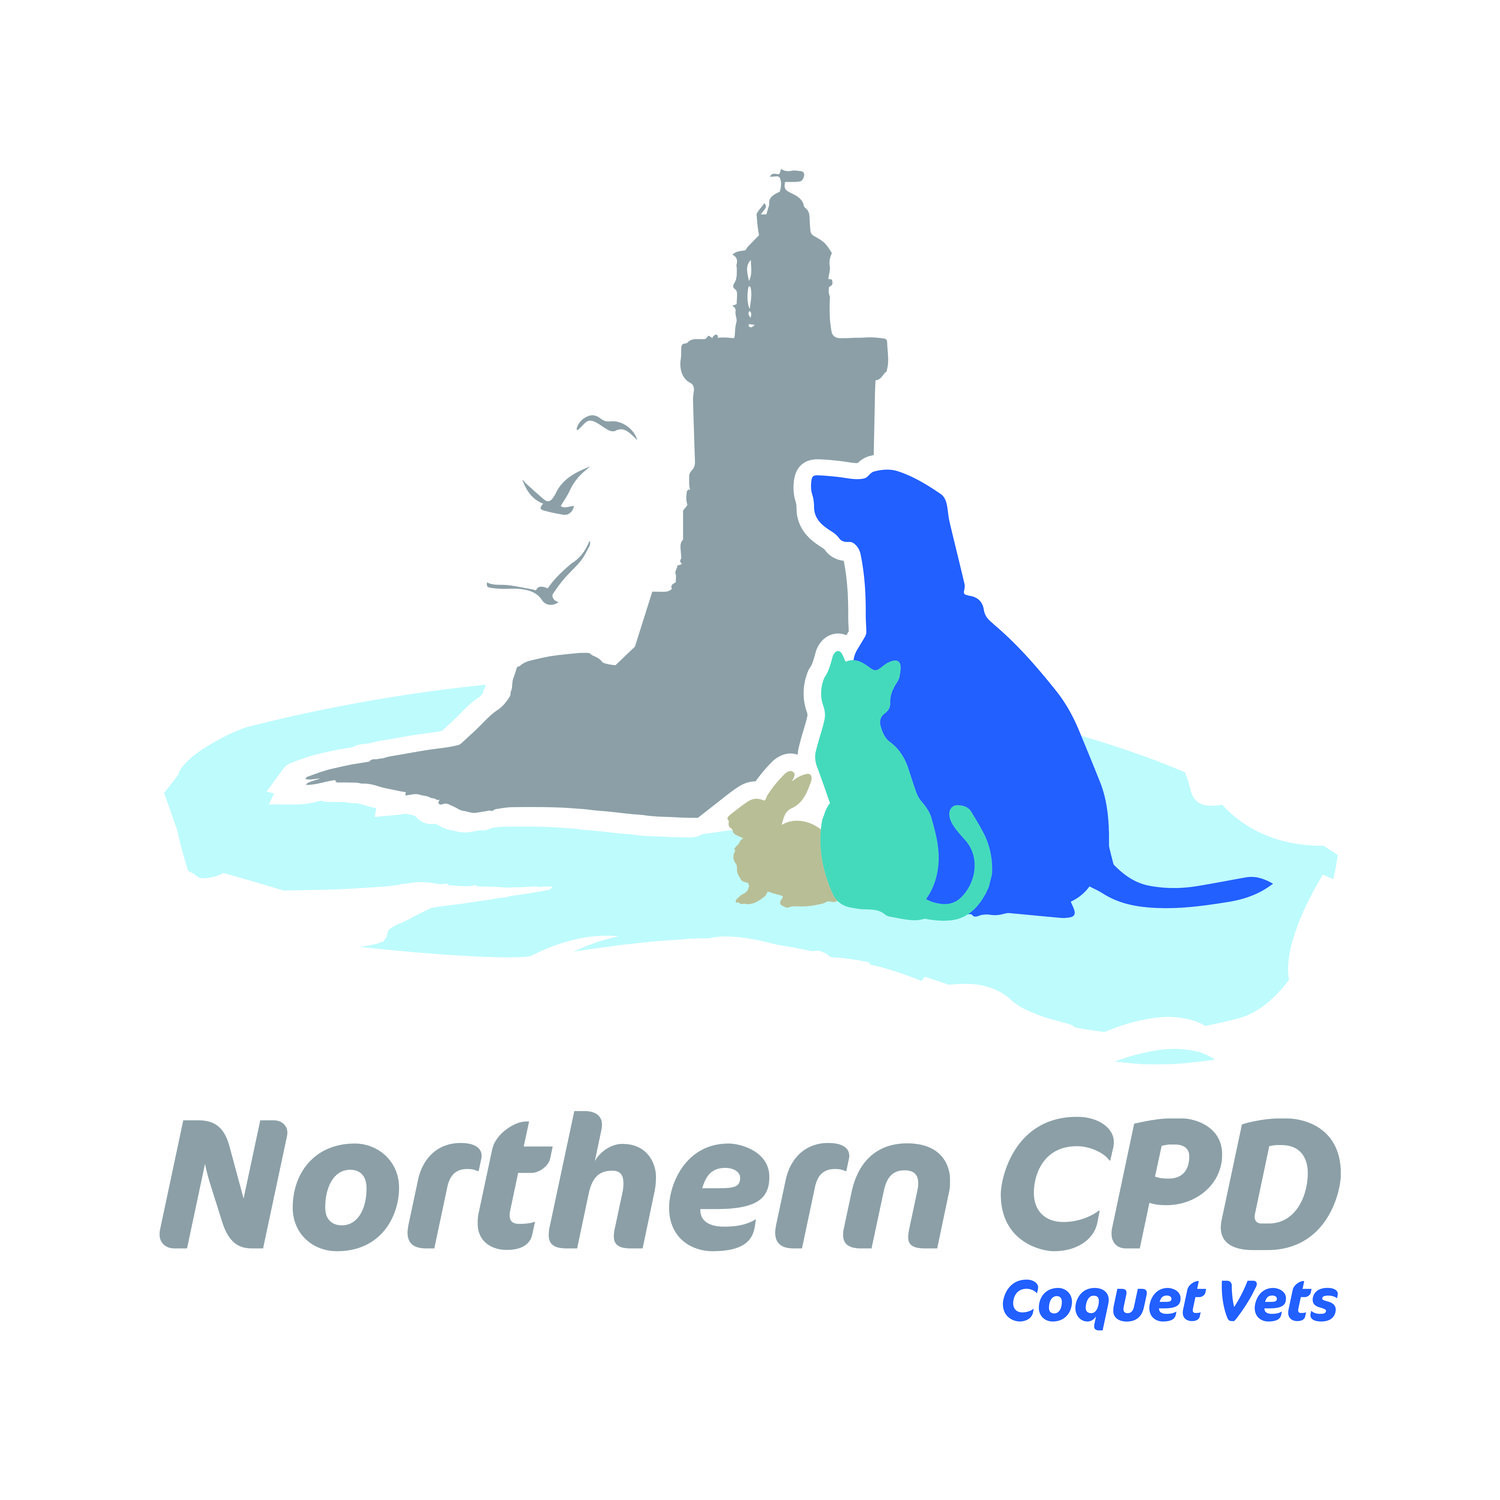 Northern CPD Coquet Vets